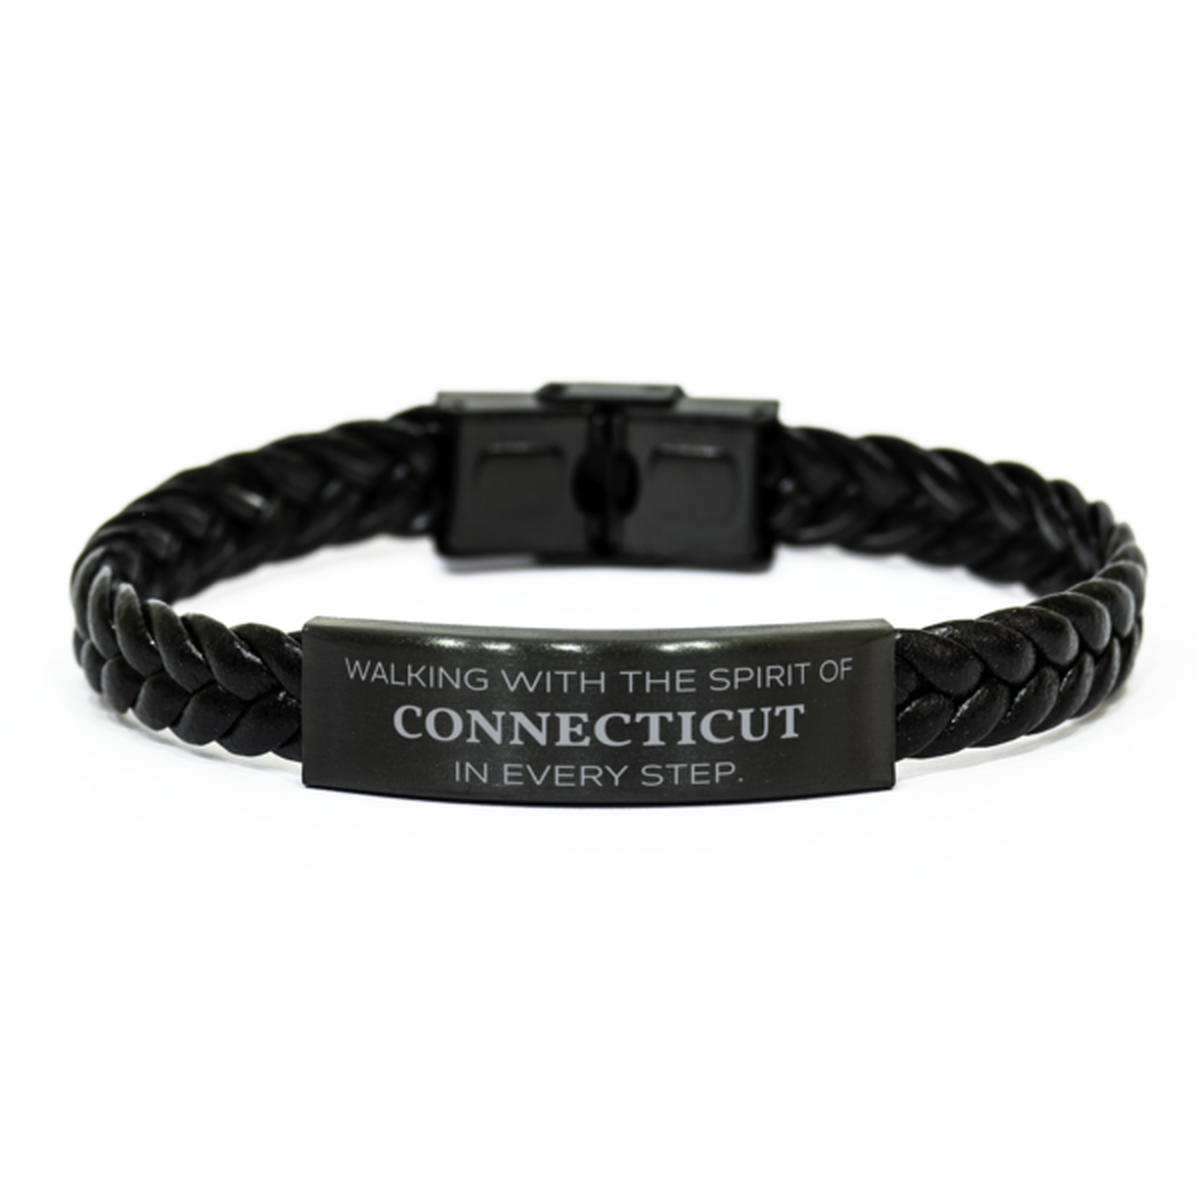 Connecticut Gifts, Walking with the spirit, Love Connecticut Birthday Christmas Braided Leather Bracelet For Connecticut People, Men, Women, Friends